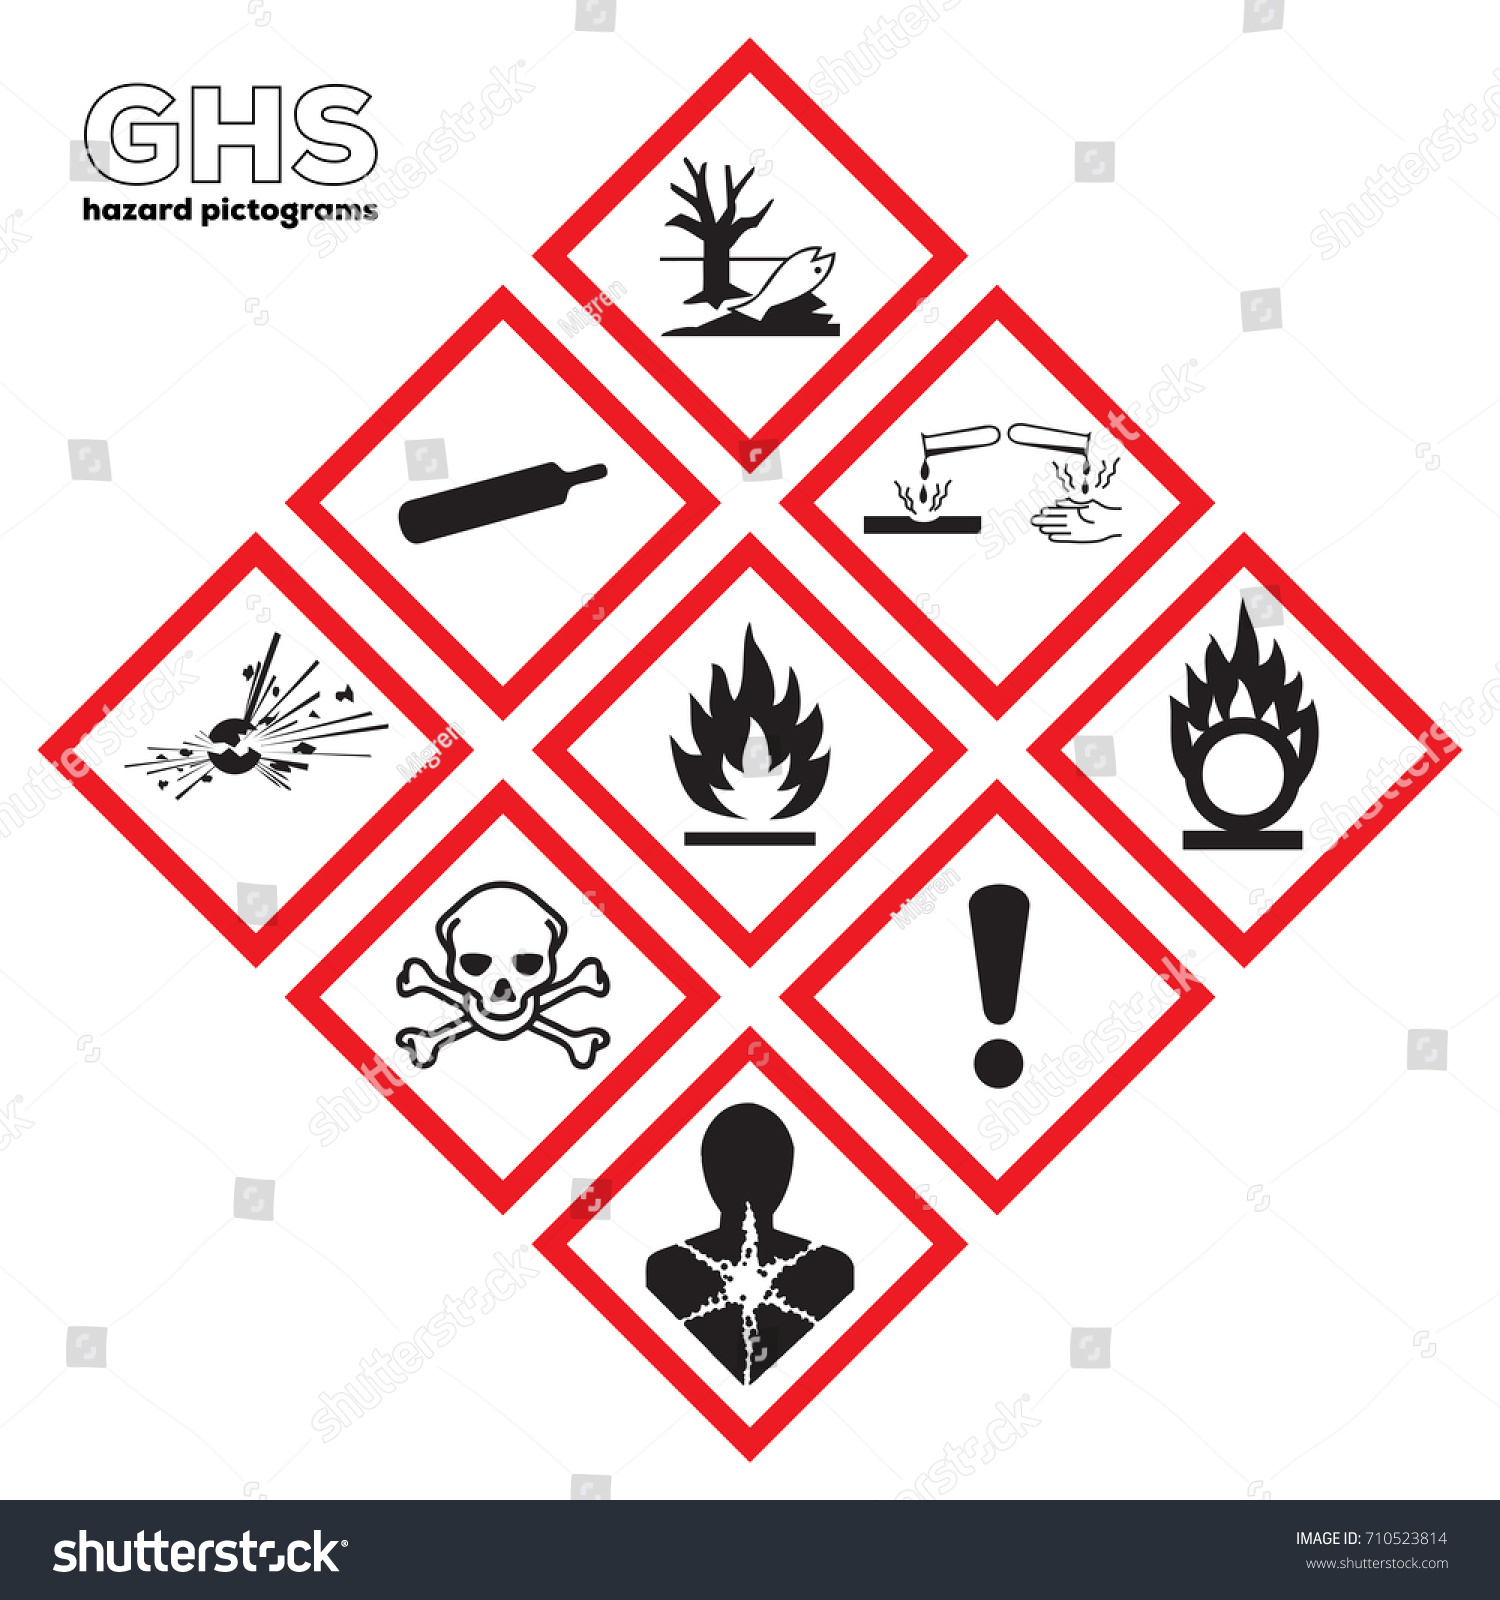 Icon Ghs Danger Safety Corrosive Chemical Stock Vector (Royalty Free ...